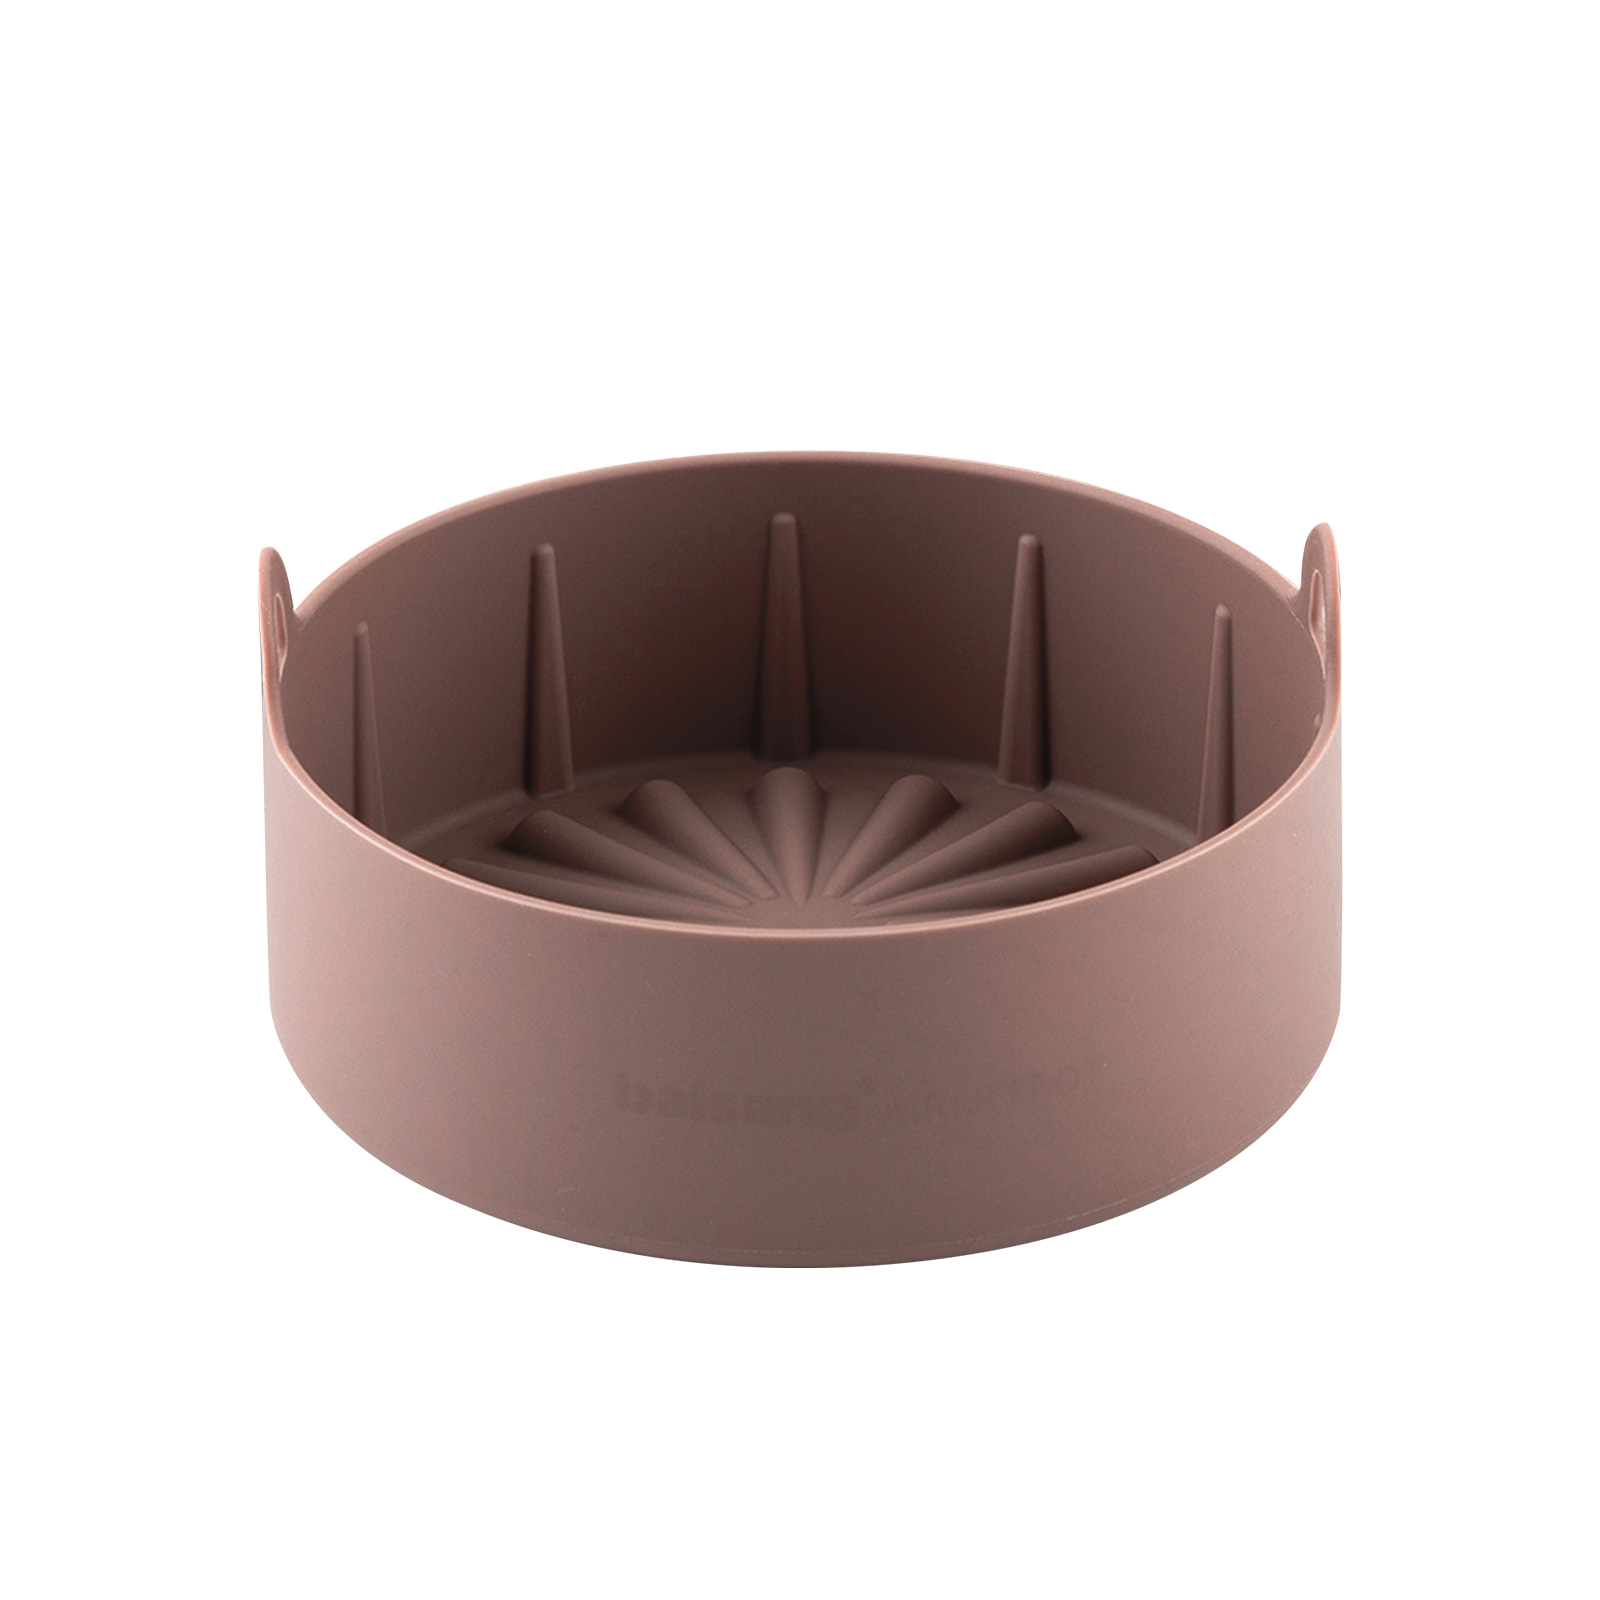 Airfryer Reusable Silicone Pot Large - CHOCOLATE